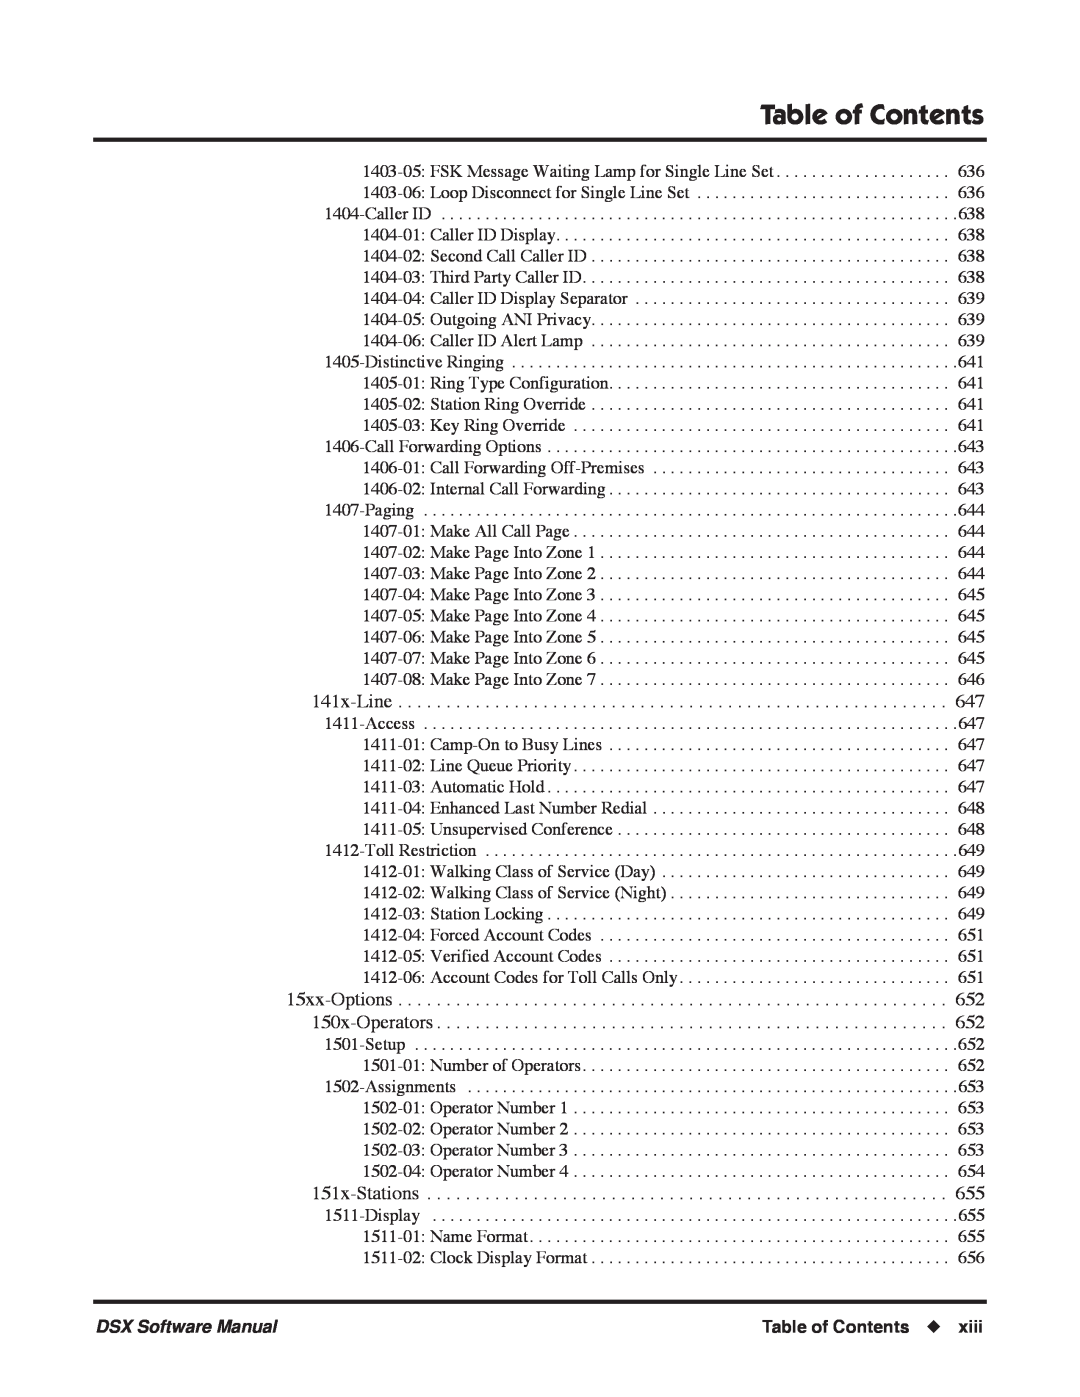 NEC P, N 1093100 software manual Table of Contents, 141x-Line 